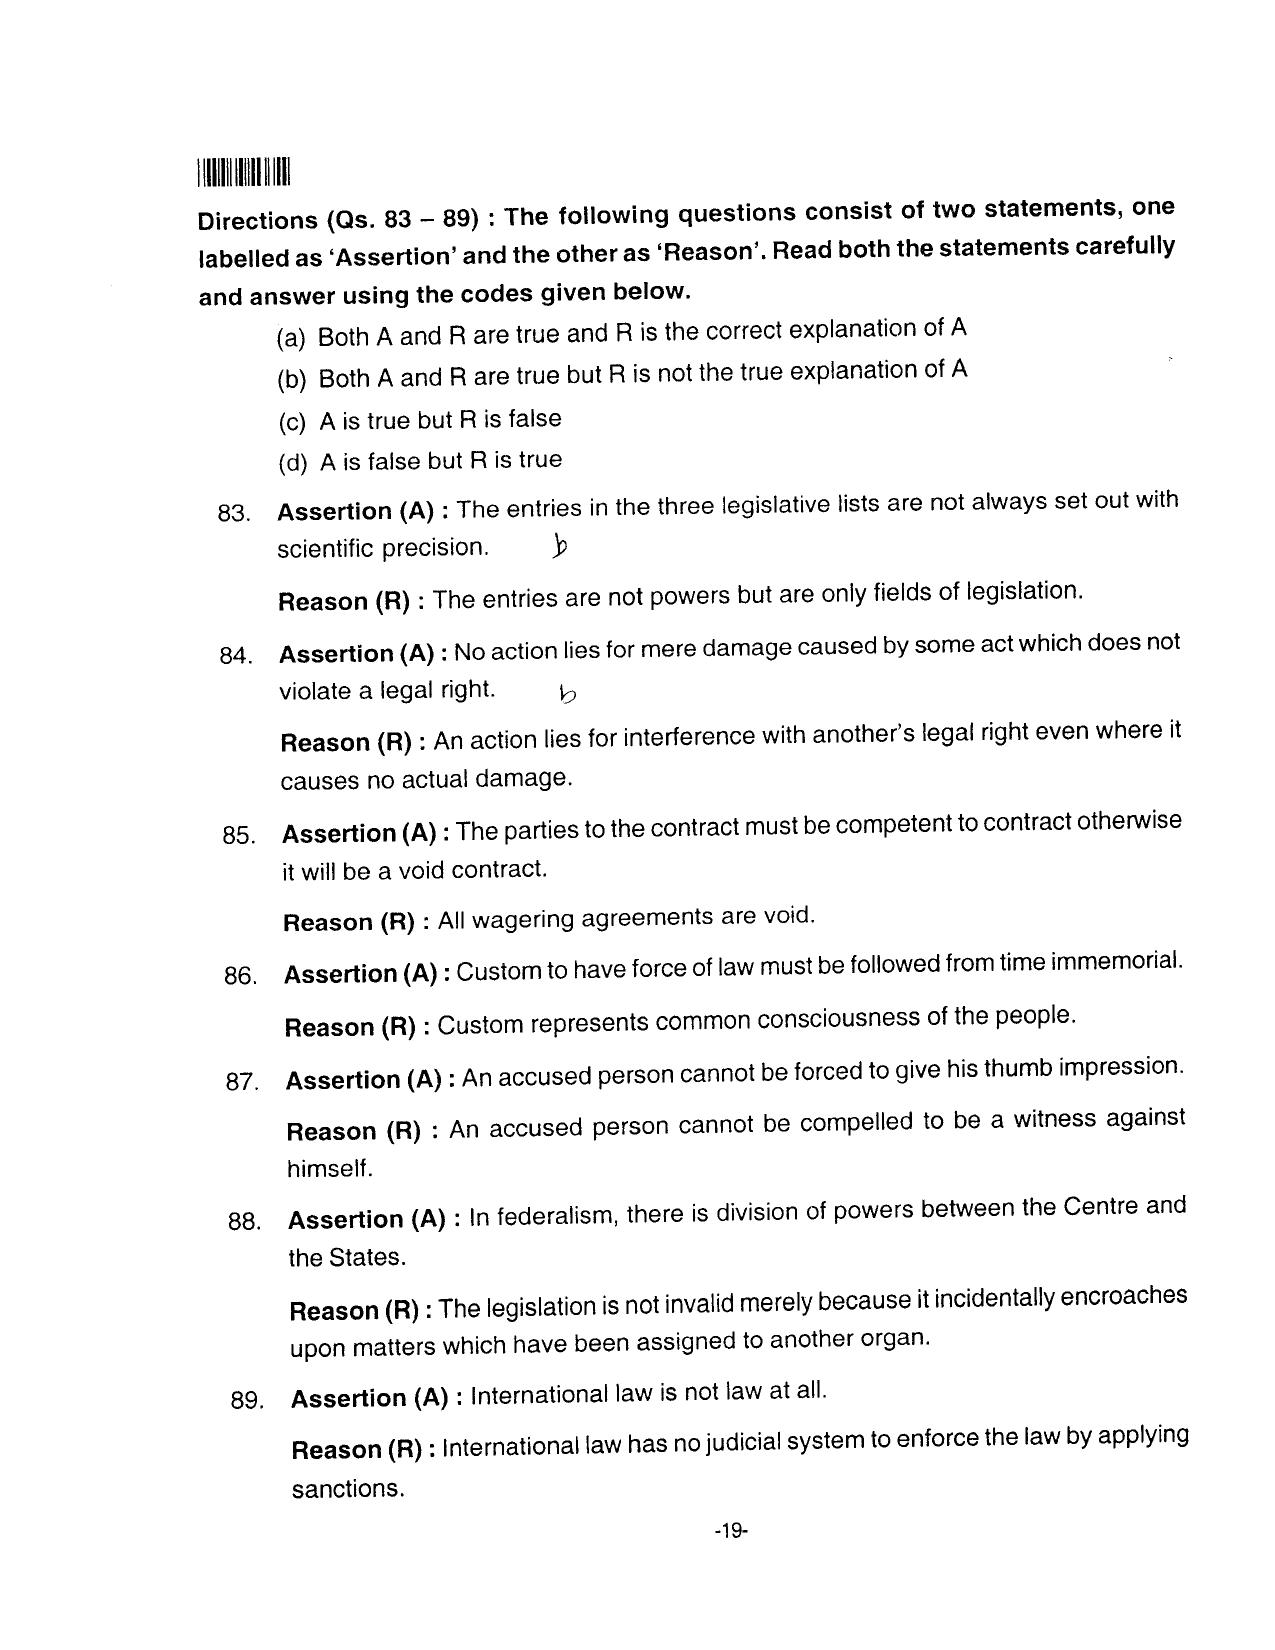 AILET 2016 Question Paper for BA LLB - Page 19